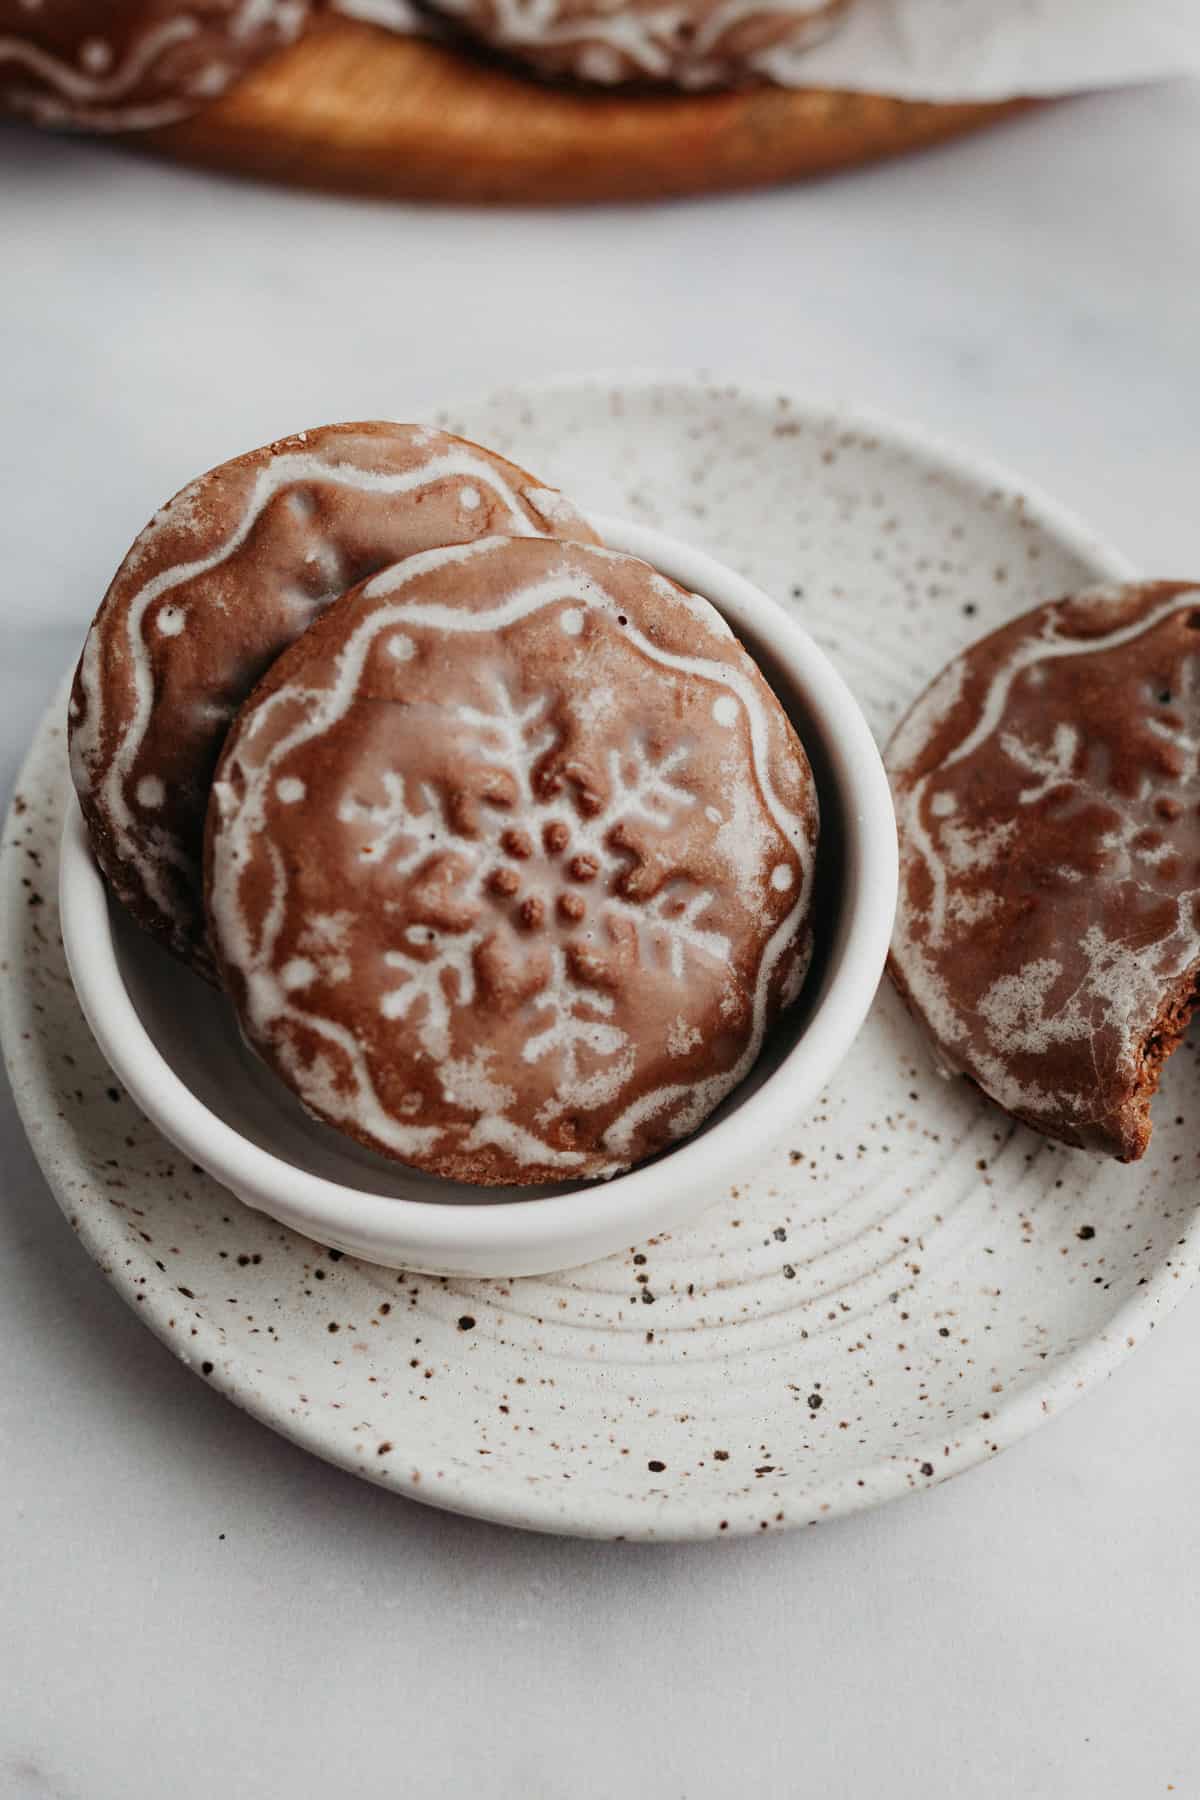 Two snowflake stamped lebkuchen cookies in a small bowl.